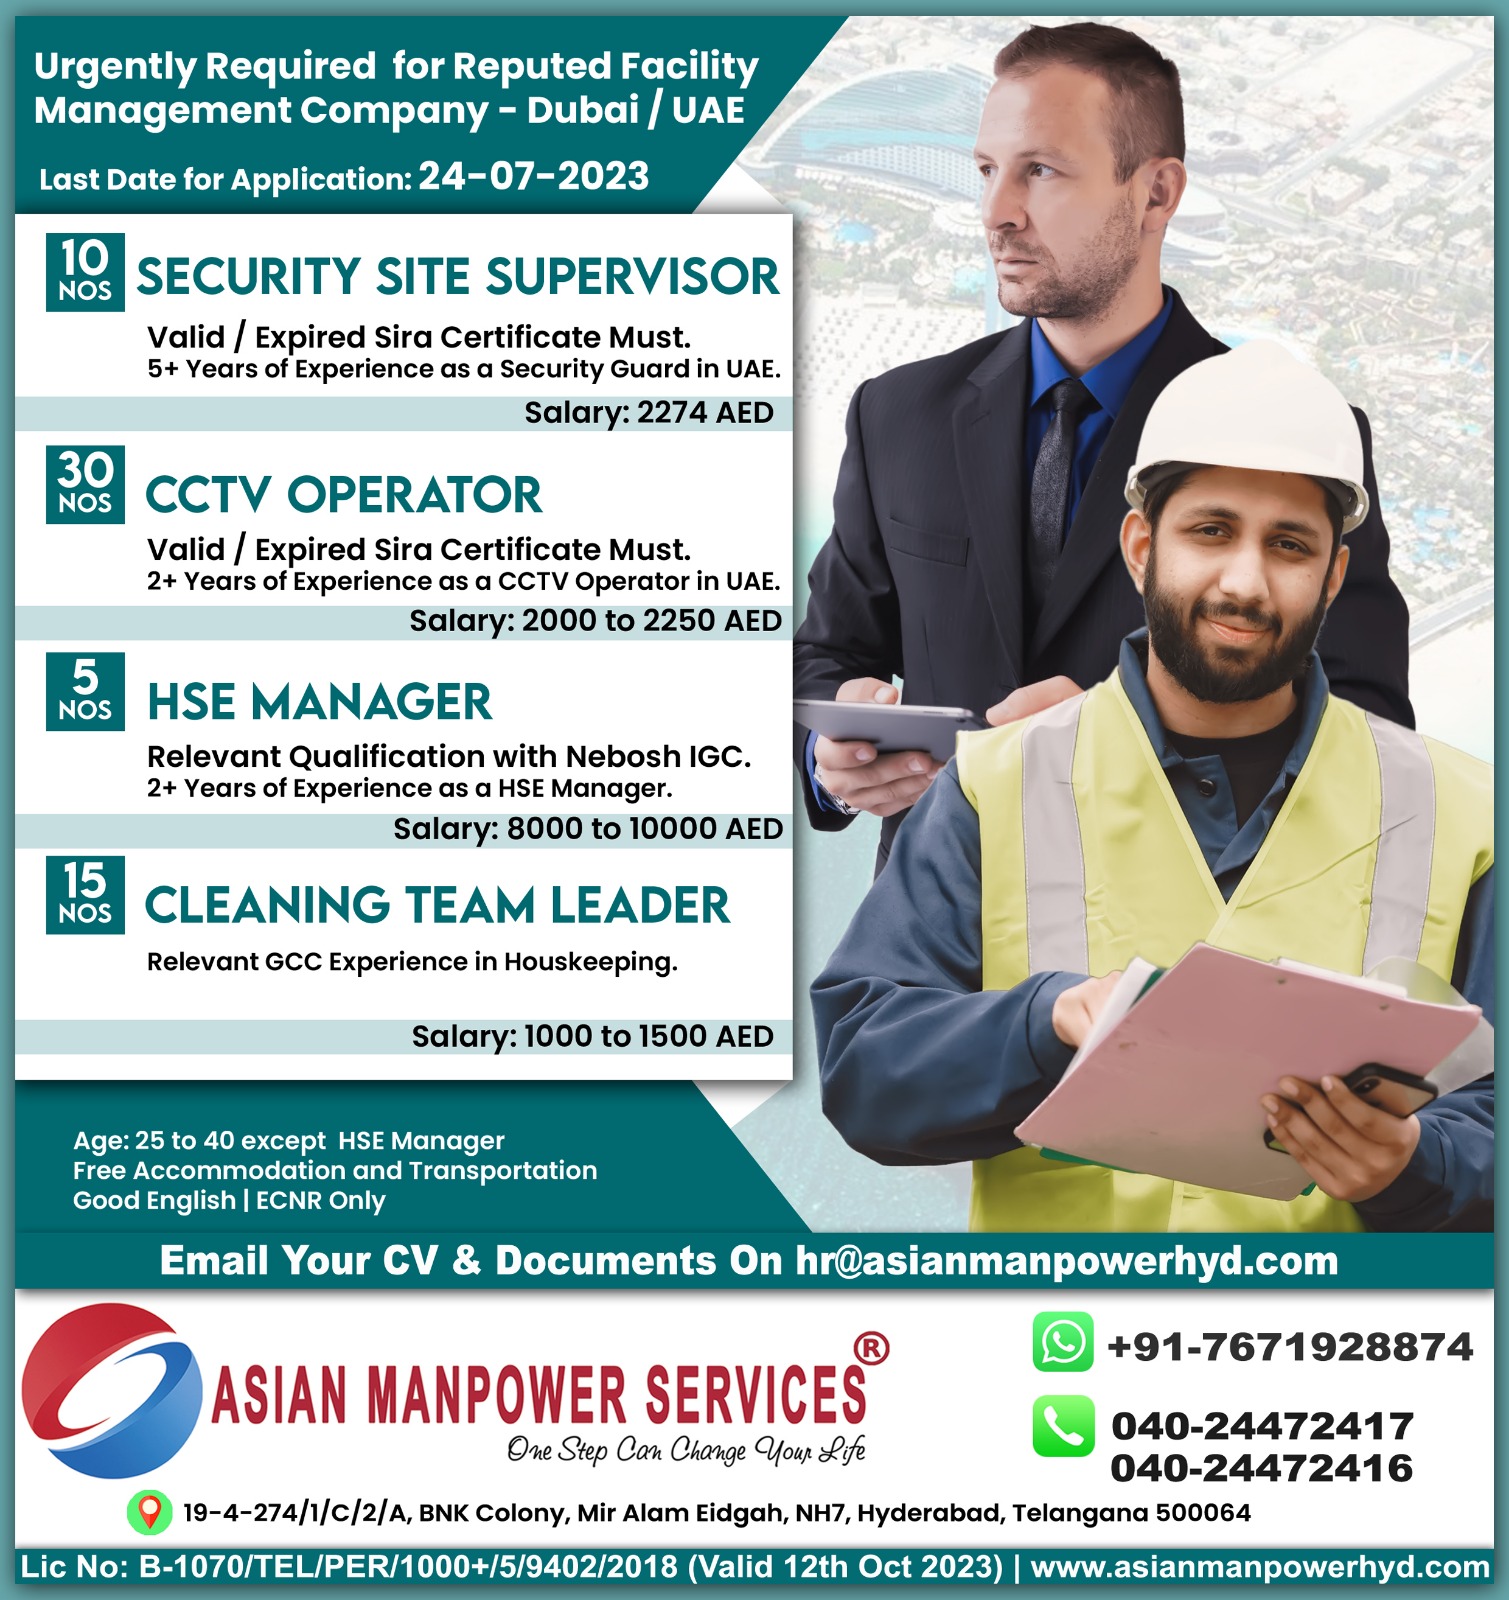 Urgently required Security Site Supervisor, CCTV Operator, HSE Manager and Cleaning Team Leader for reputed Facility Management Company UAE Dubai